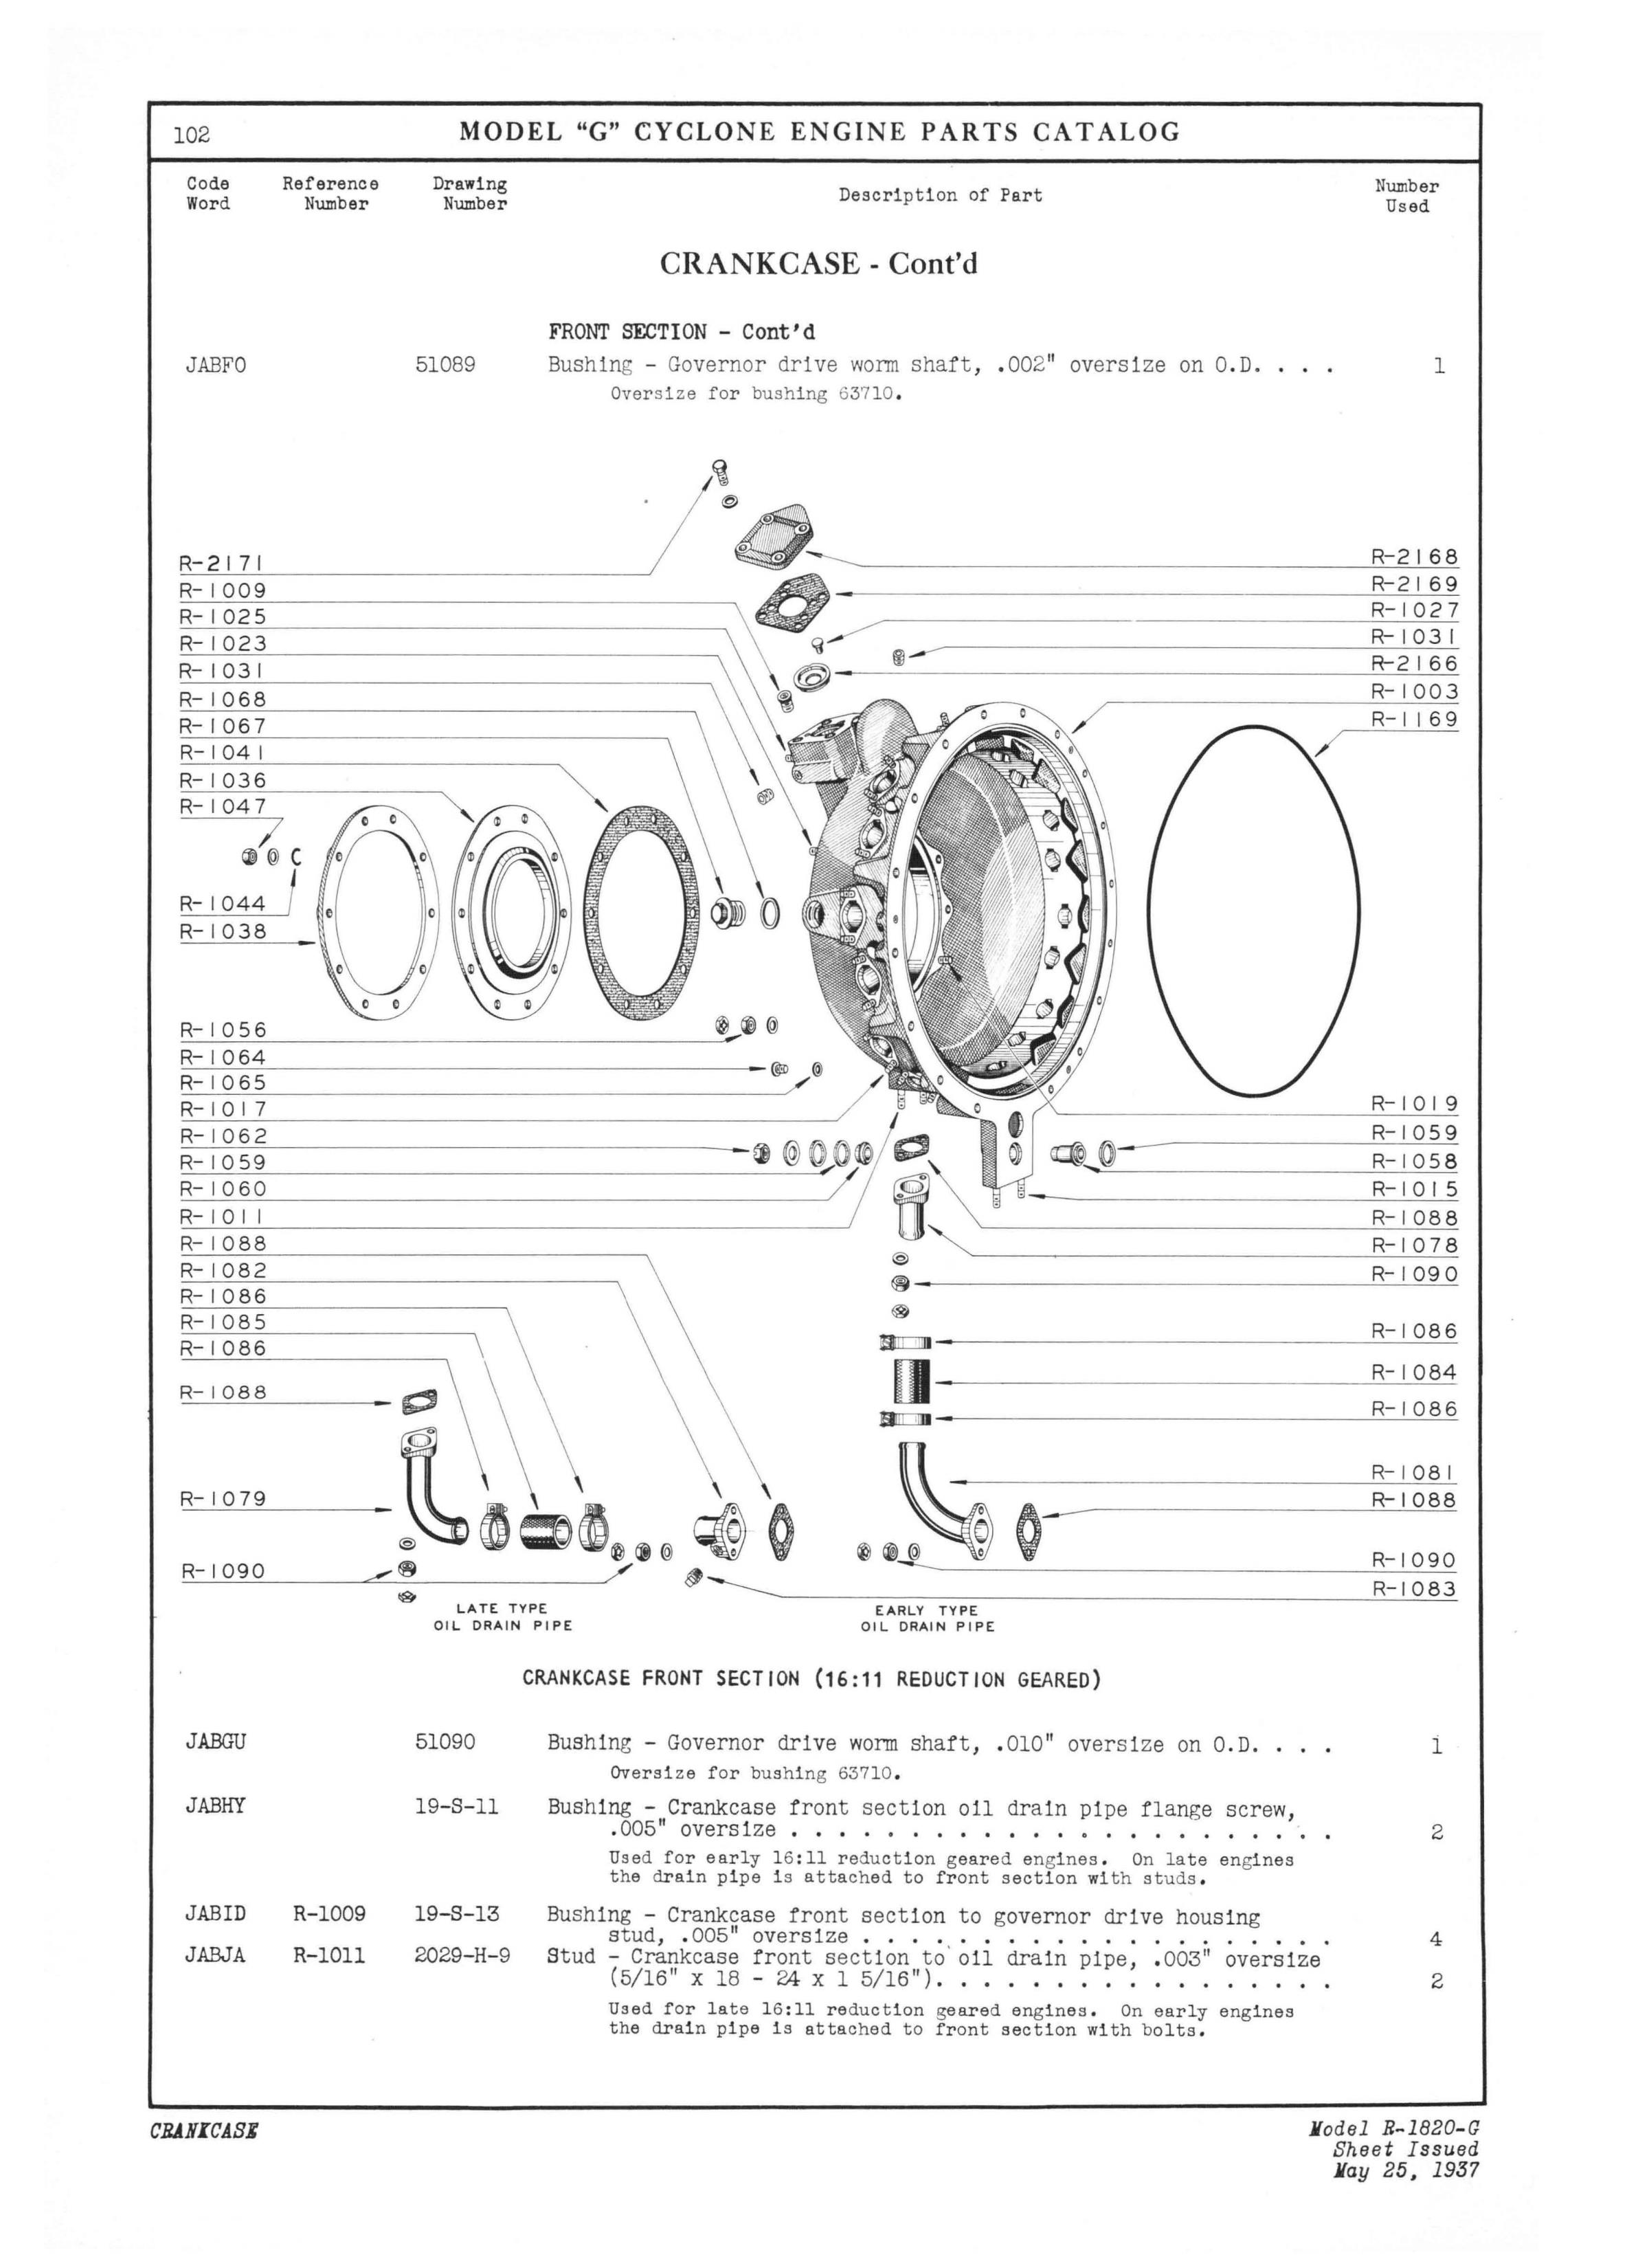 Sample page 12 from AirCorps Library document: Parts Catalog for Wright Cyclone Engines R-1820-G (Excluding -100 Series)